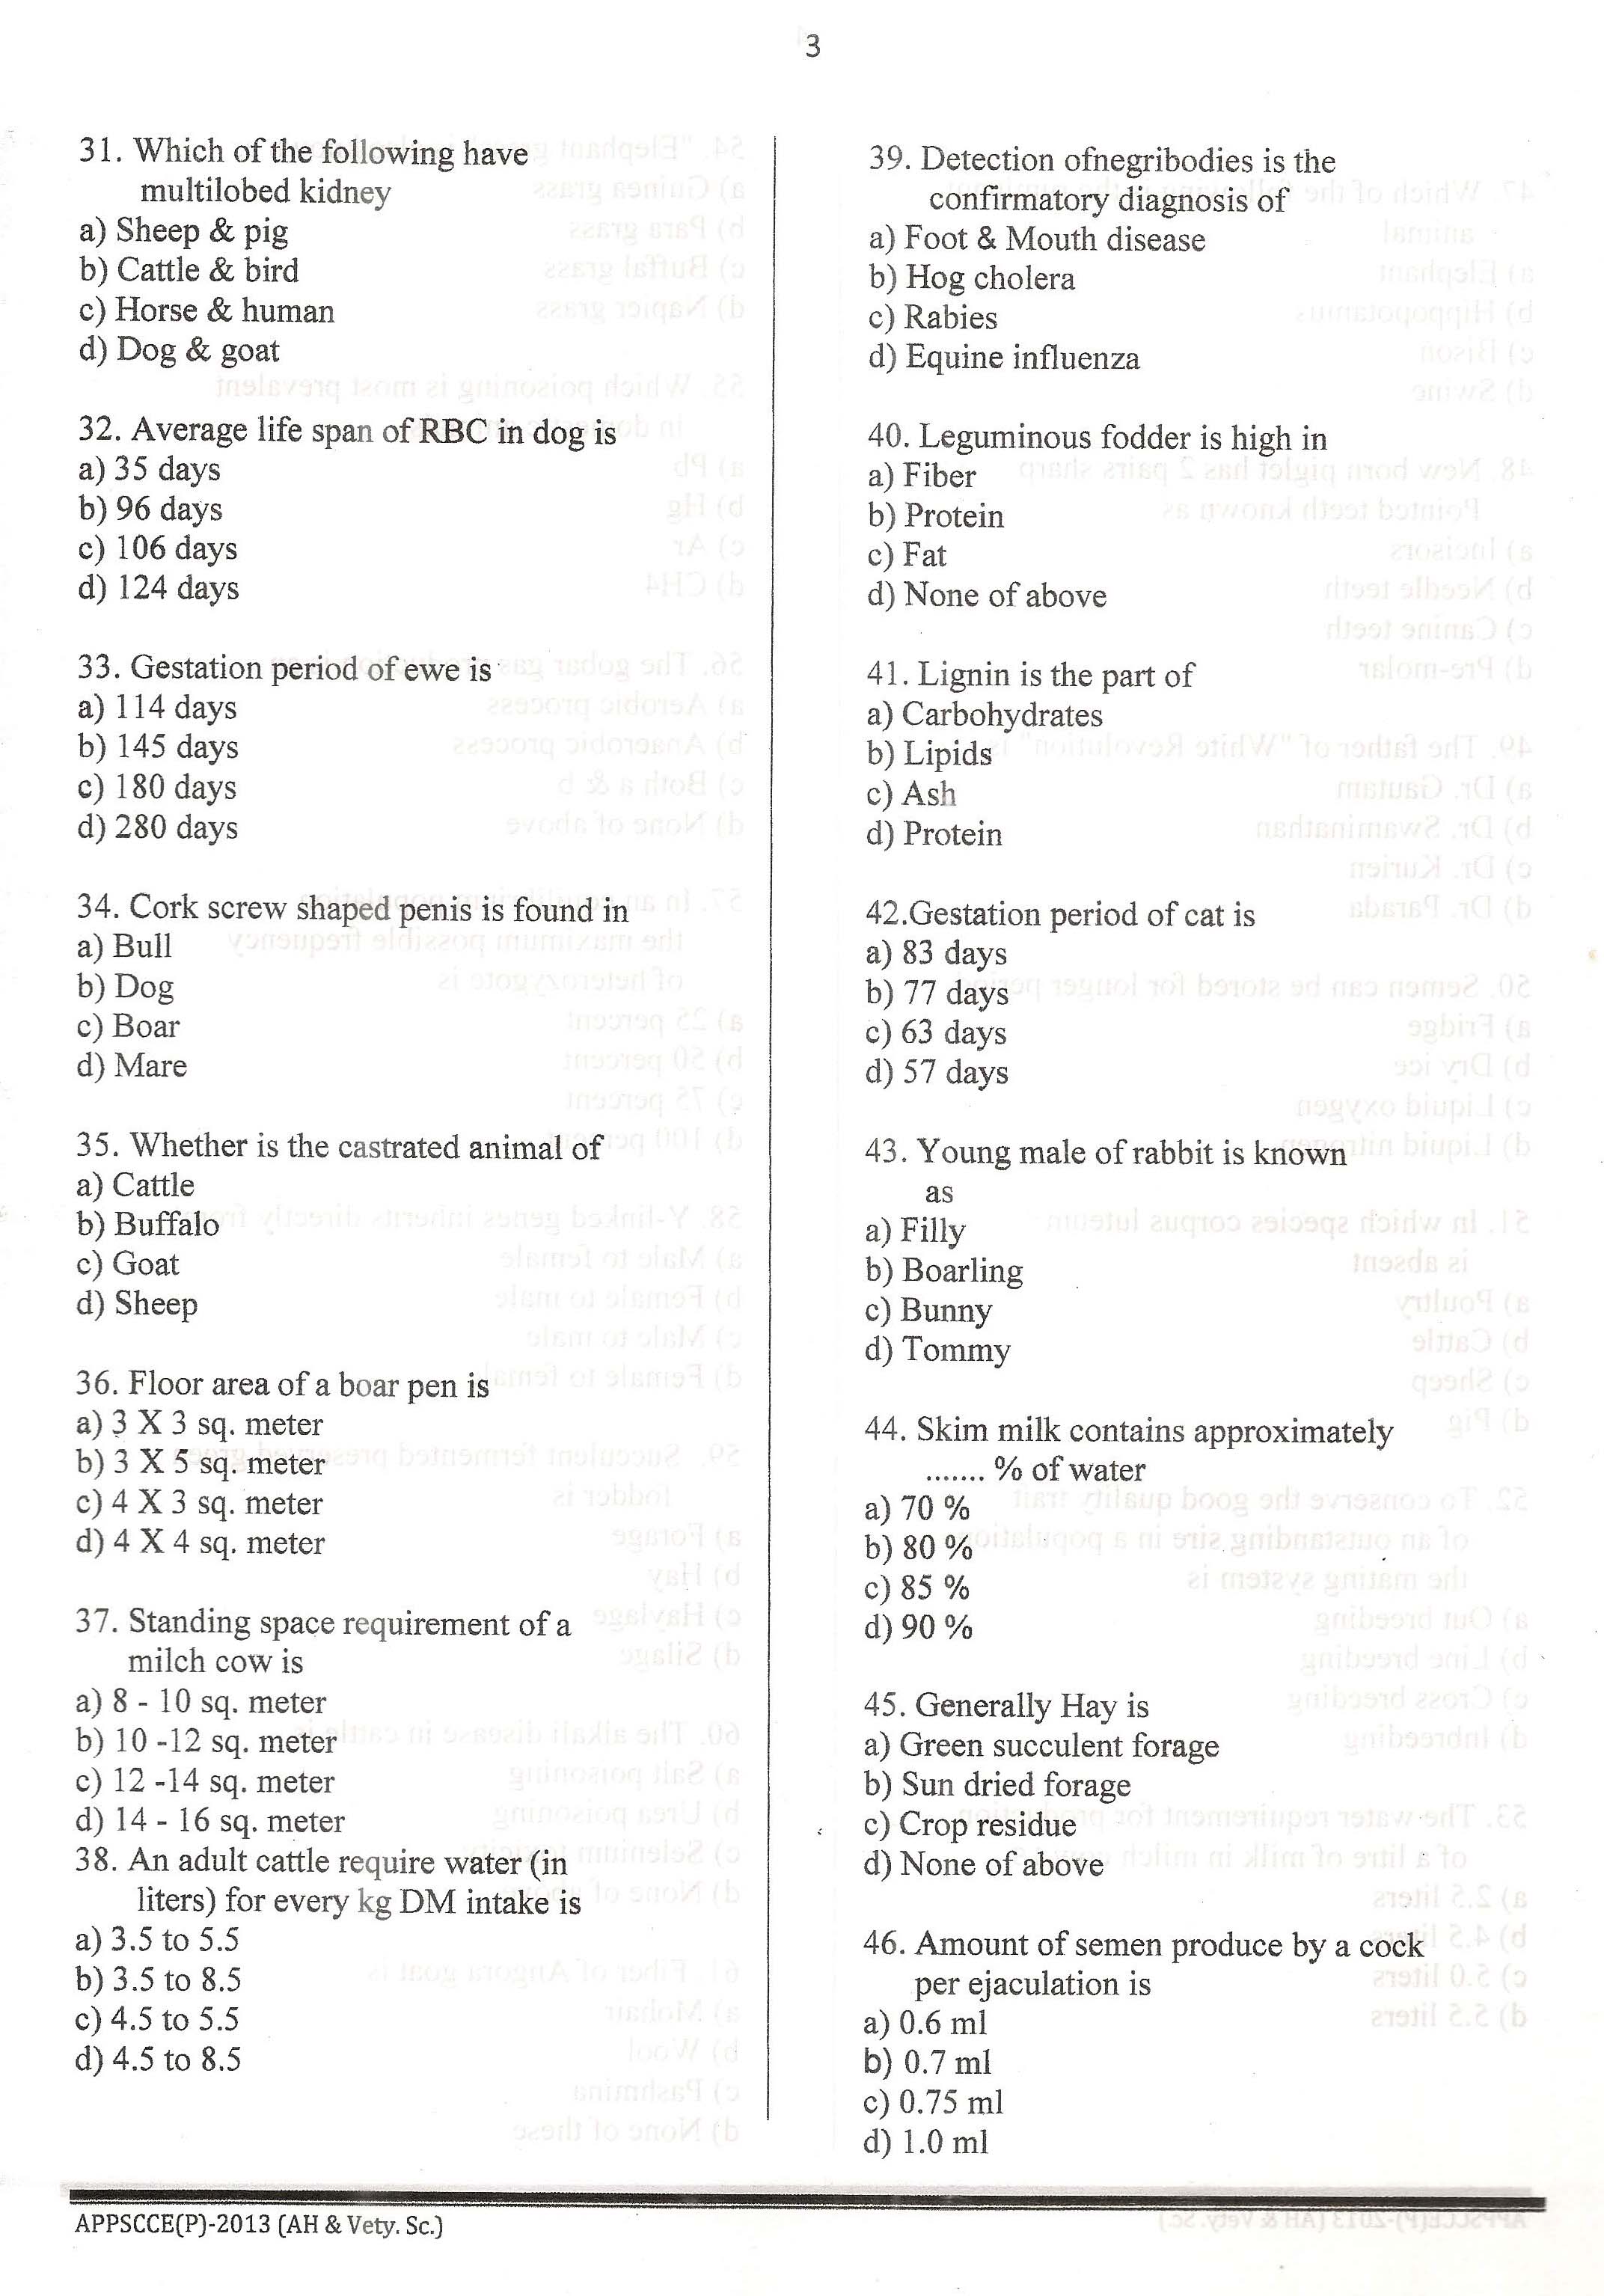 APPSC Combined Competitive Prelims Exam 2013 AH And Vety Science 4